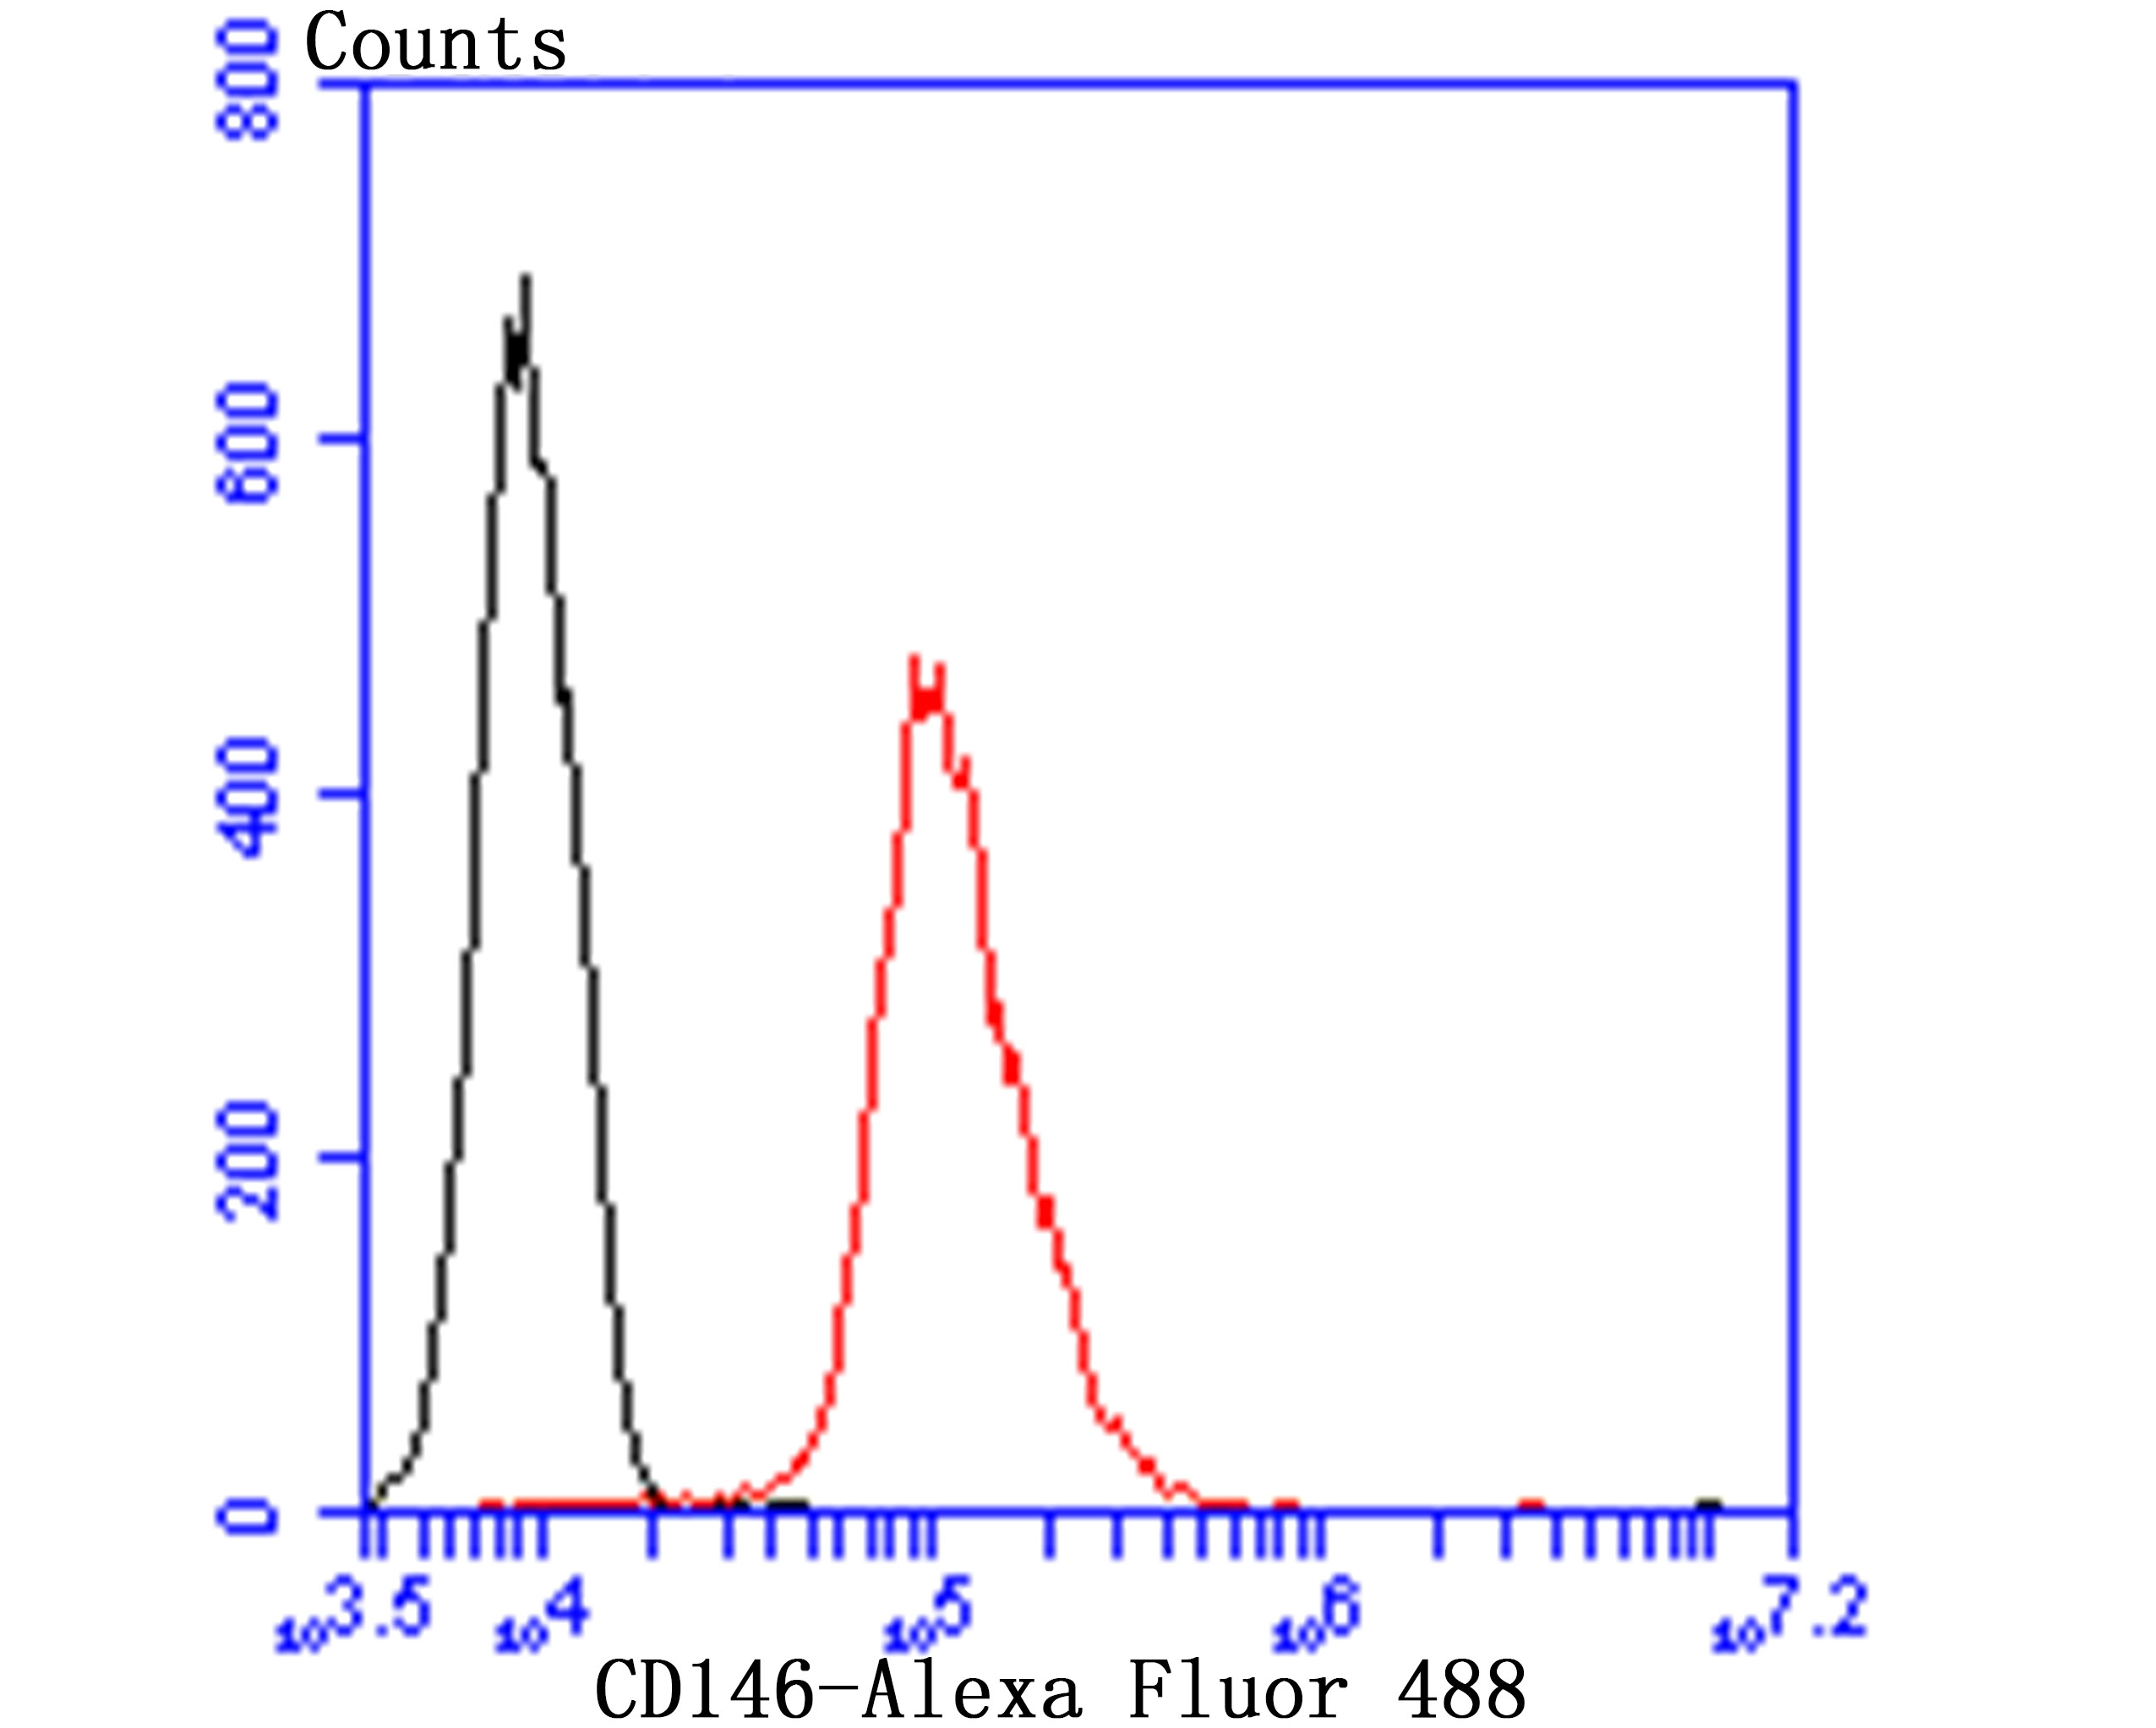 Flow cytometric analysis of CD146 was done on HUVEC cells. The cells were fixed, permeabilized and stained with the primary antibody (ET7107-91, 1/50) (red). After incubation of the primary antibody at room temperature for an hour, the cells were stained with a Alexa Fluor®488 conjugate-Goat anti-Rabbit IgG Secondary antibody at 1/1000 dilution for 30 minutes.Unlabelled sample was used as a control (cells without incubation with primary antibody; black).